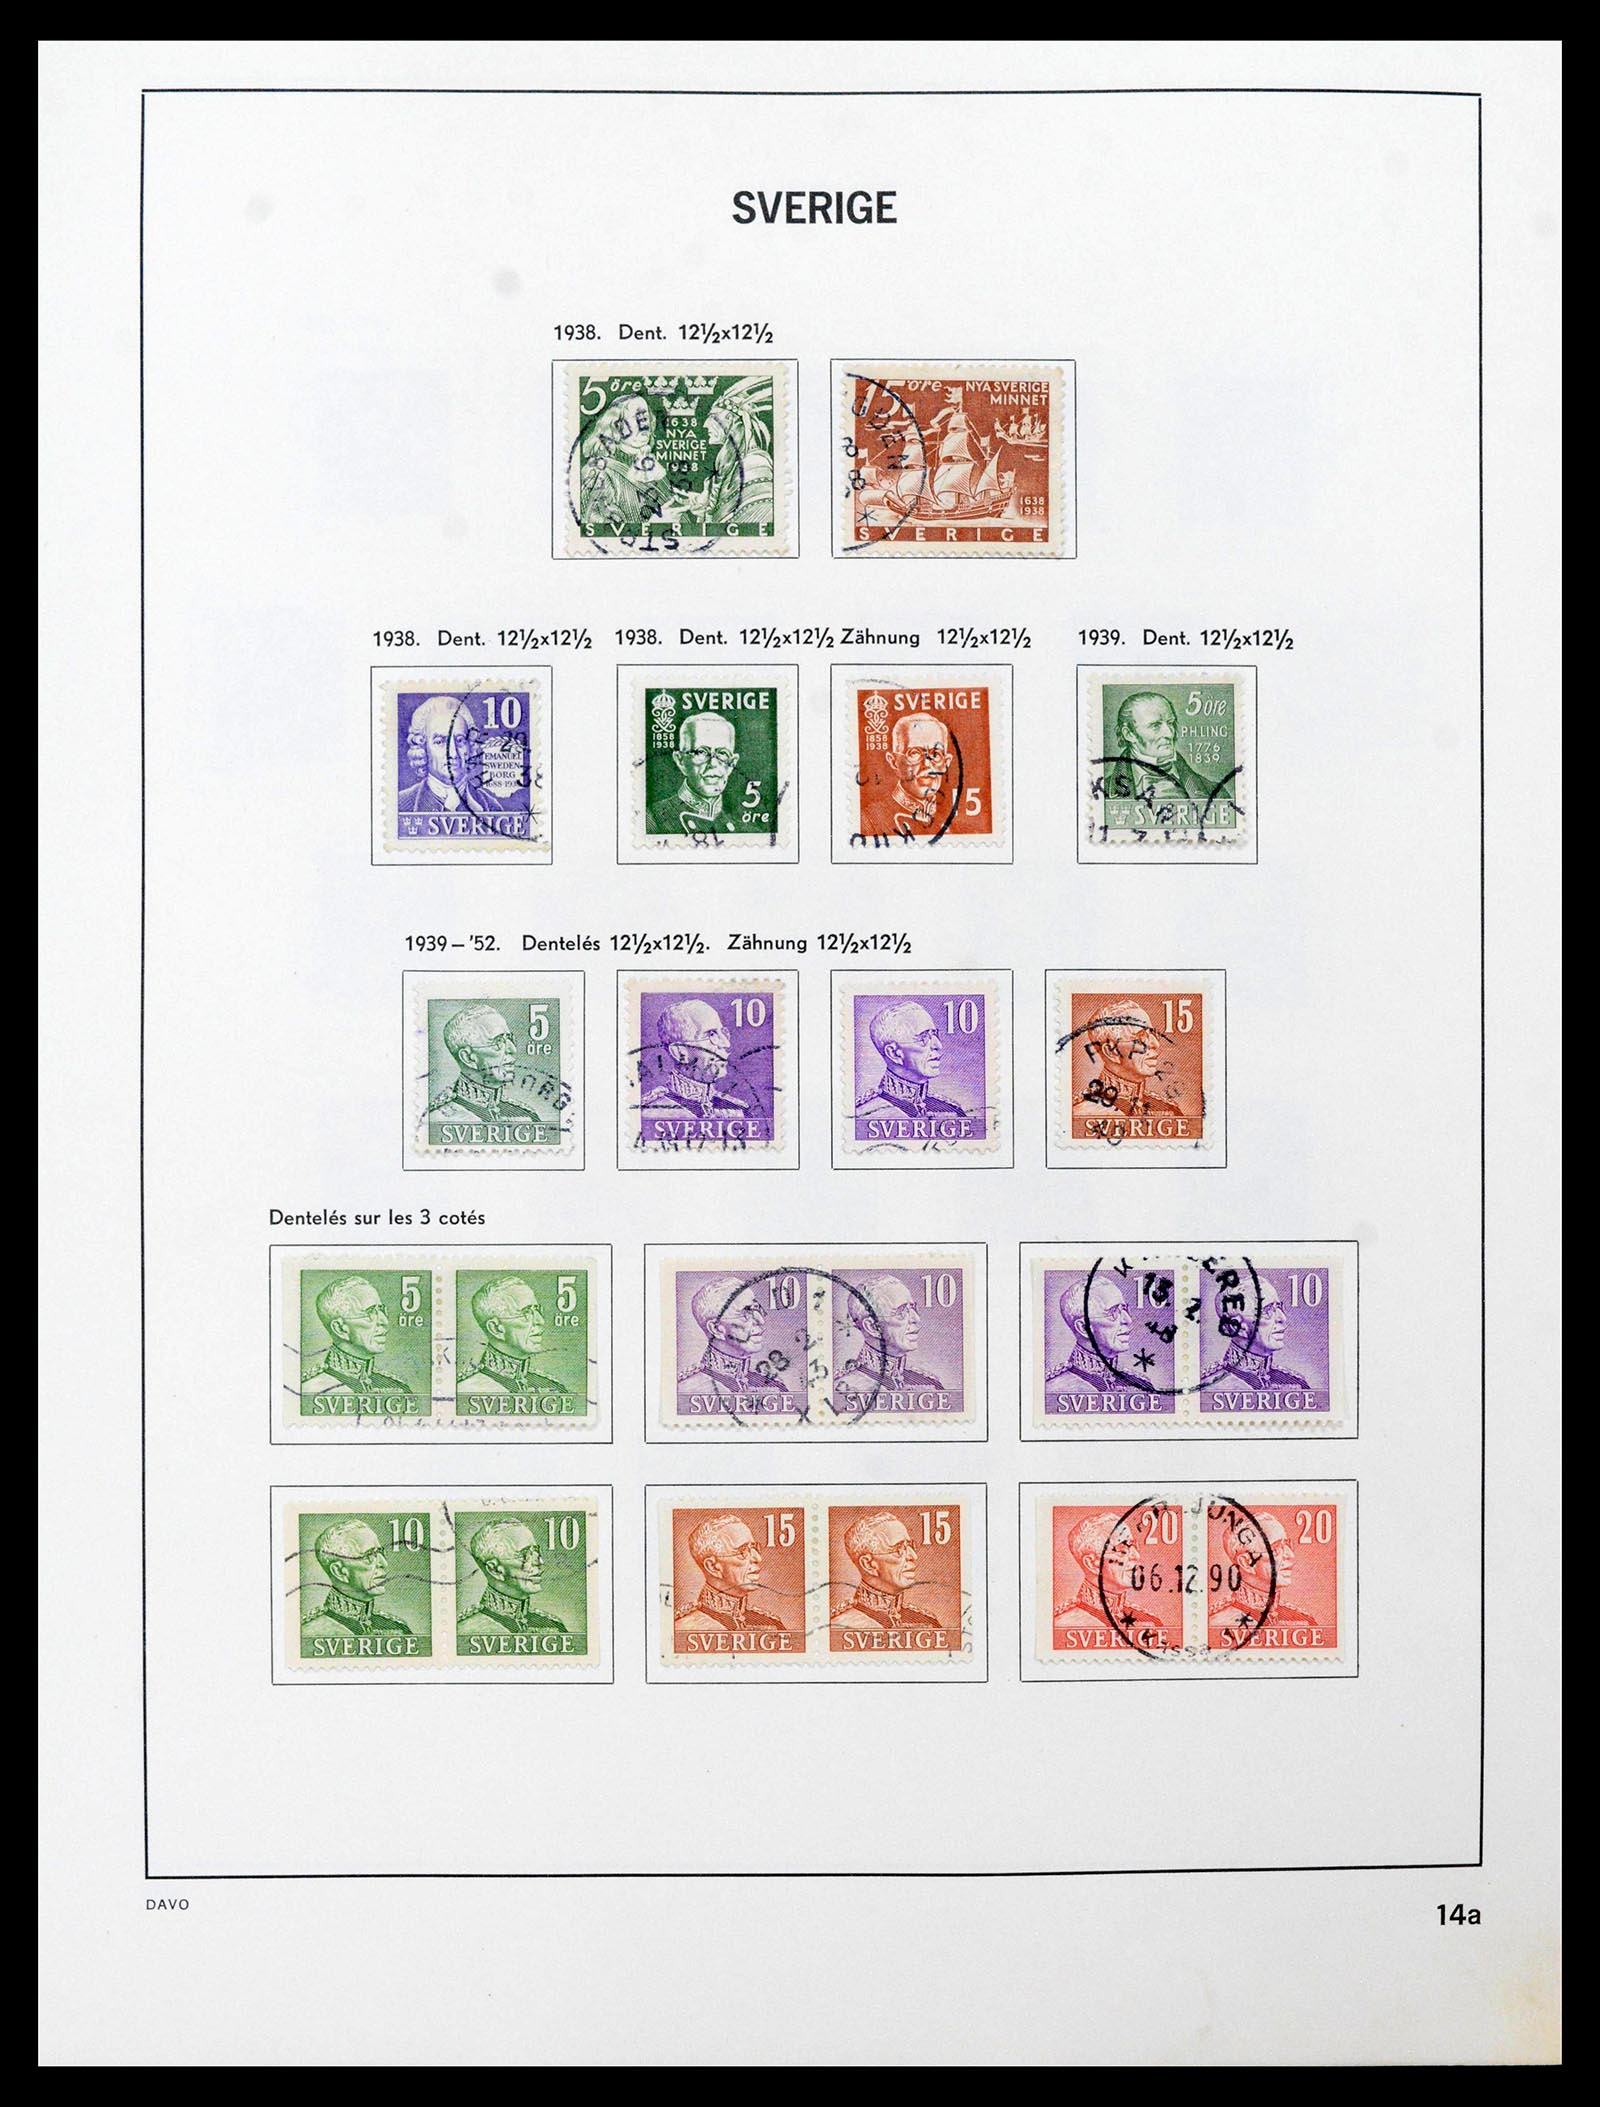 39331 0017 - Stamp collection 39331 Sweden 1855-2005.